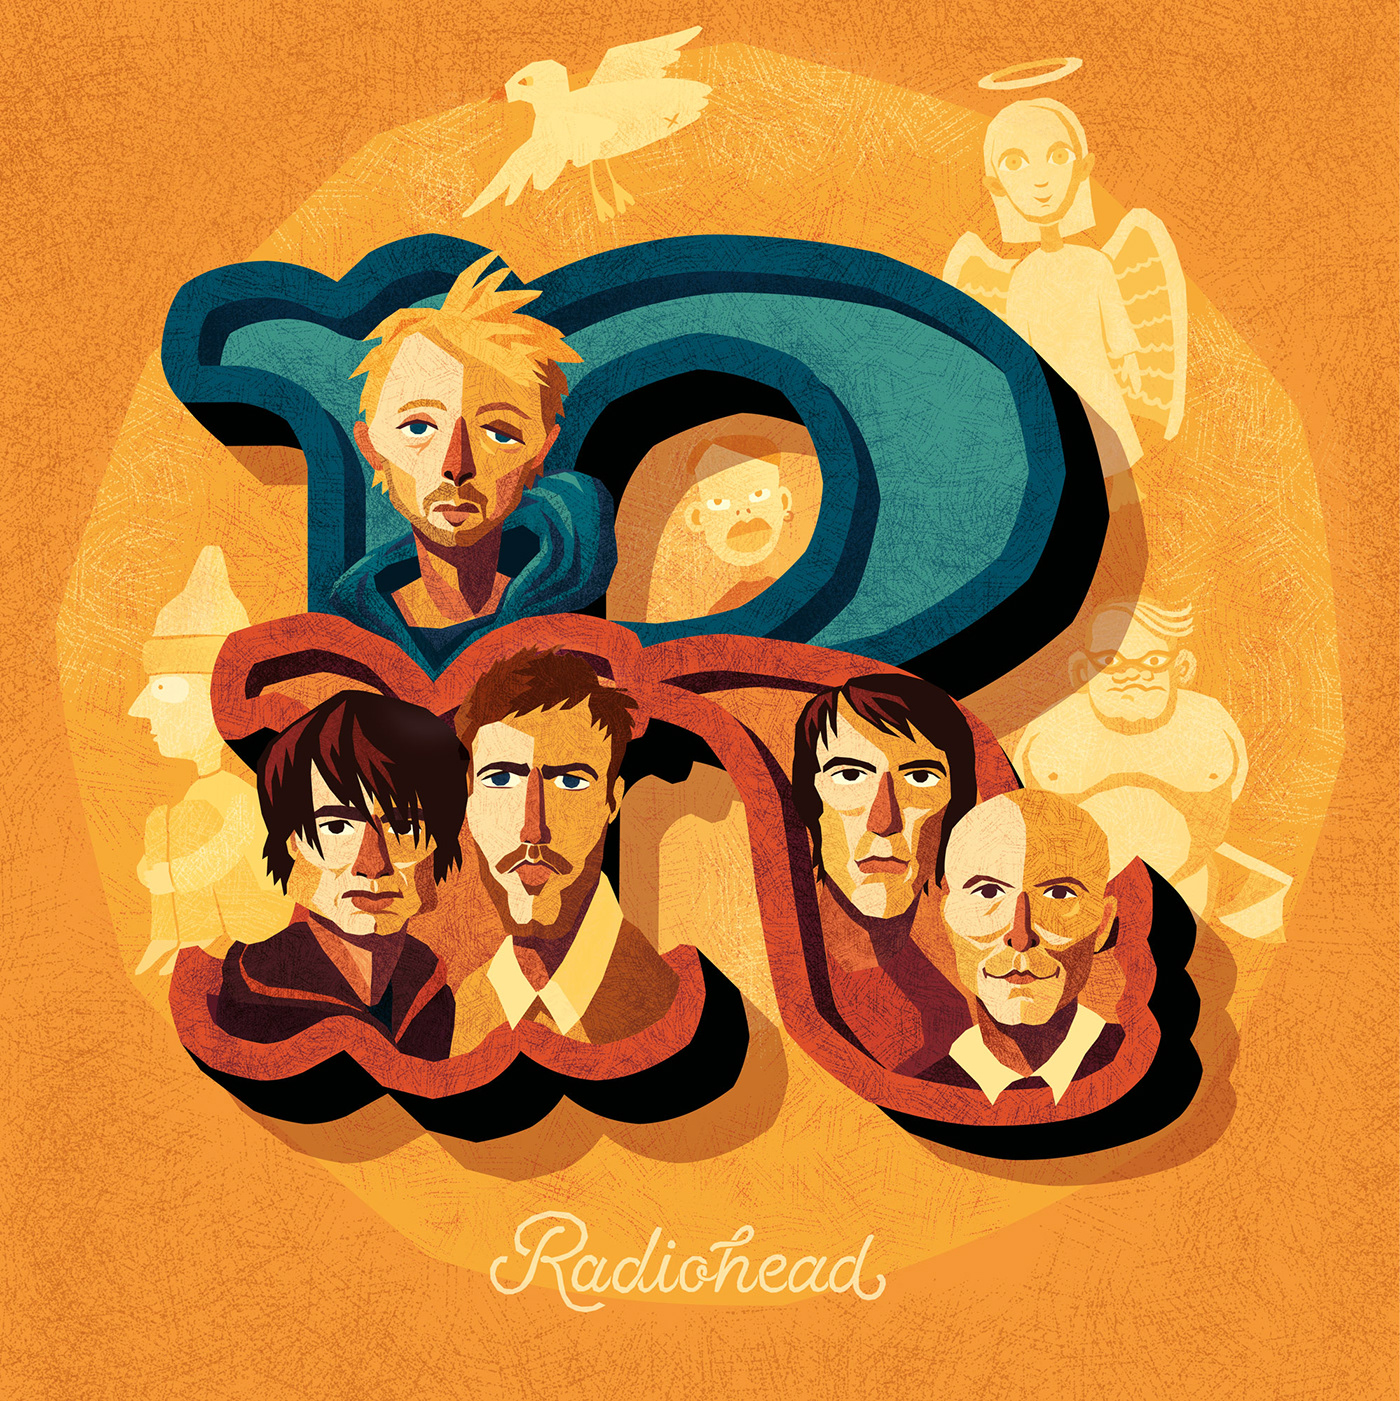 Decorative capital letter R with caricatures of the band Radiohead